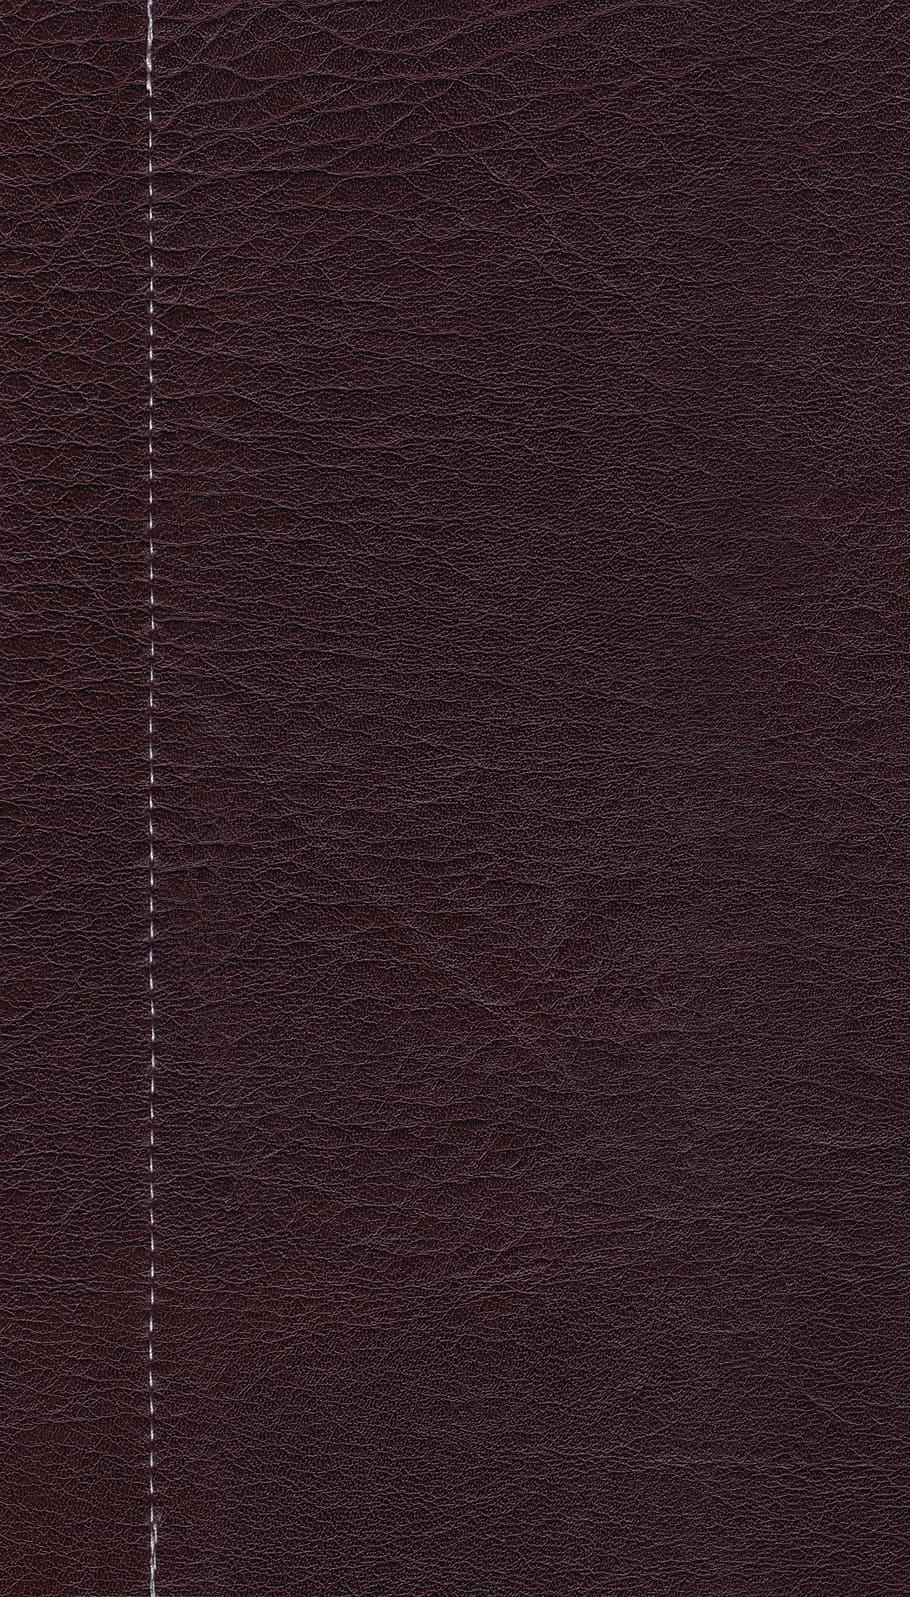 leather, textures, background, fabric, raw, decor, material, pattern, art, skin